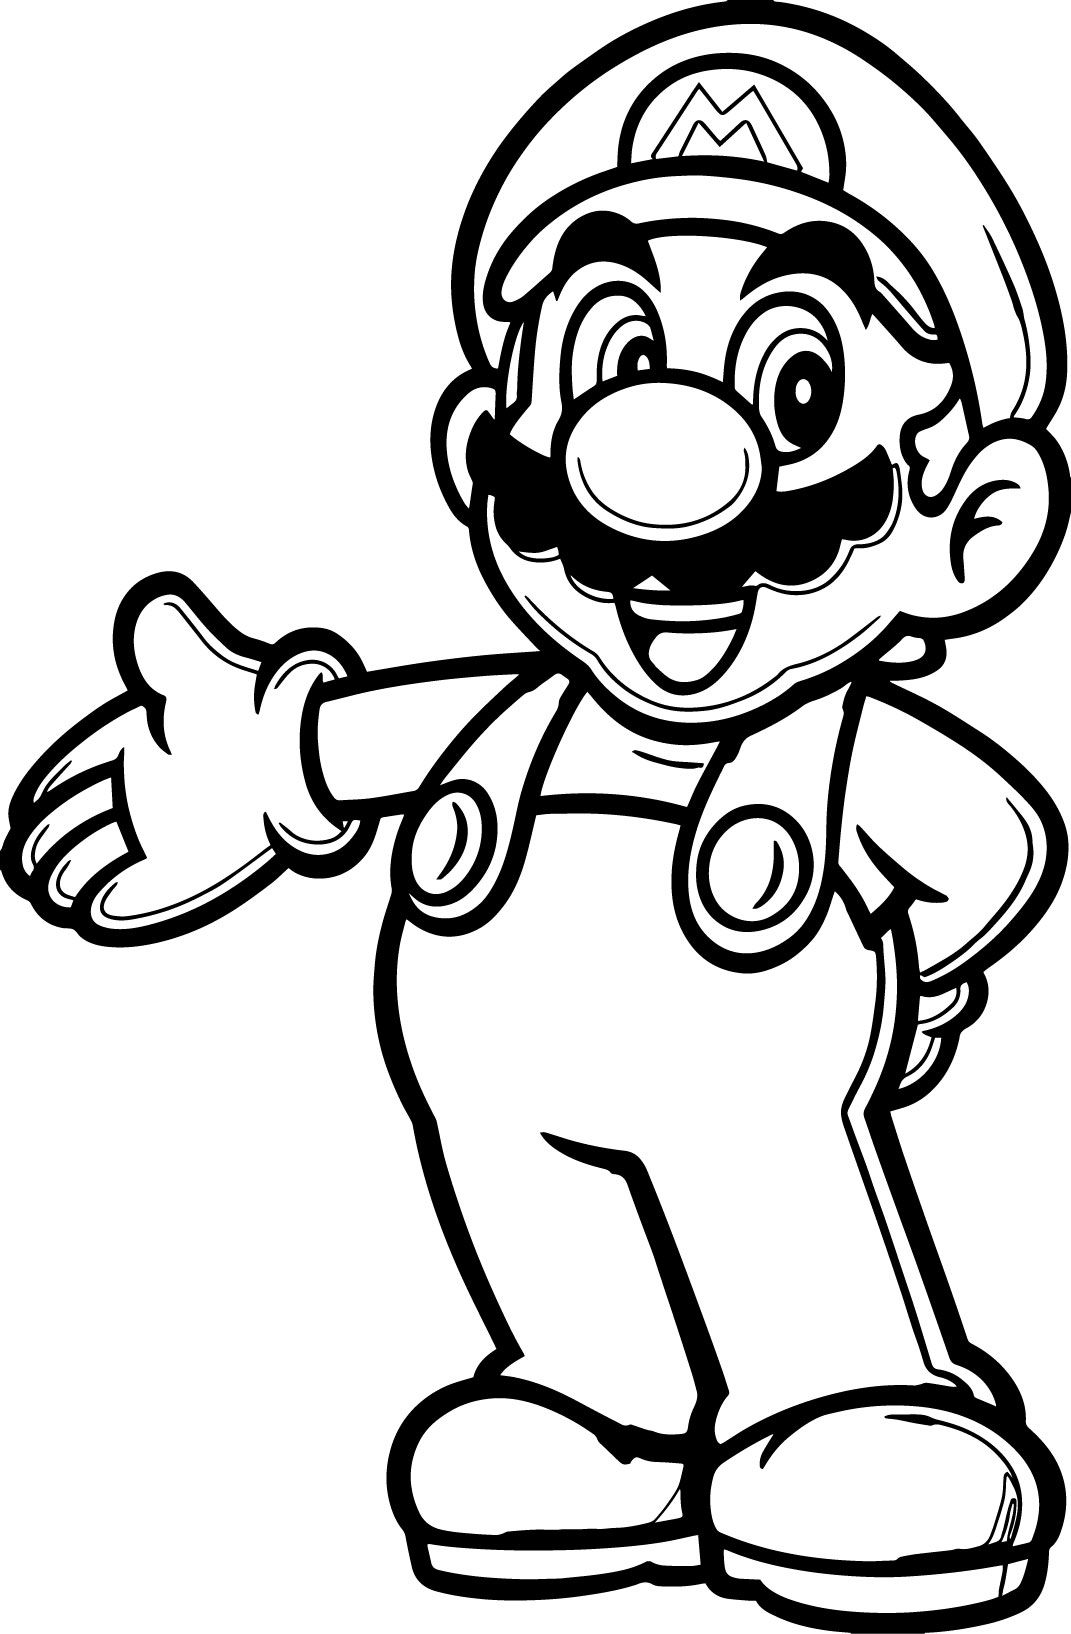 mario bros printable coloring pages free printable resources for teachers parents and children pages printable mario coloring bros 